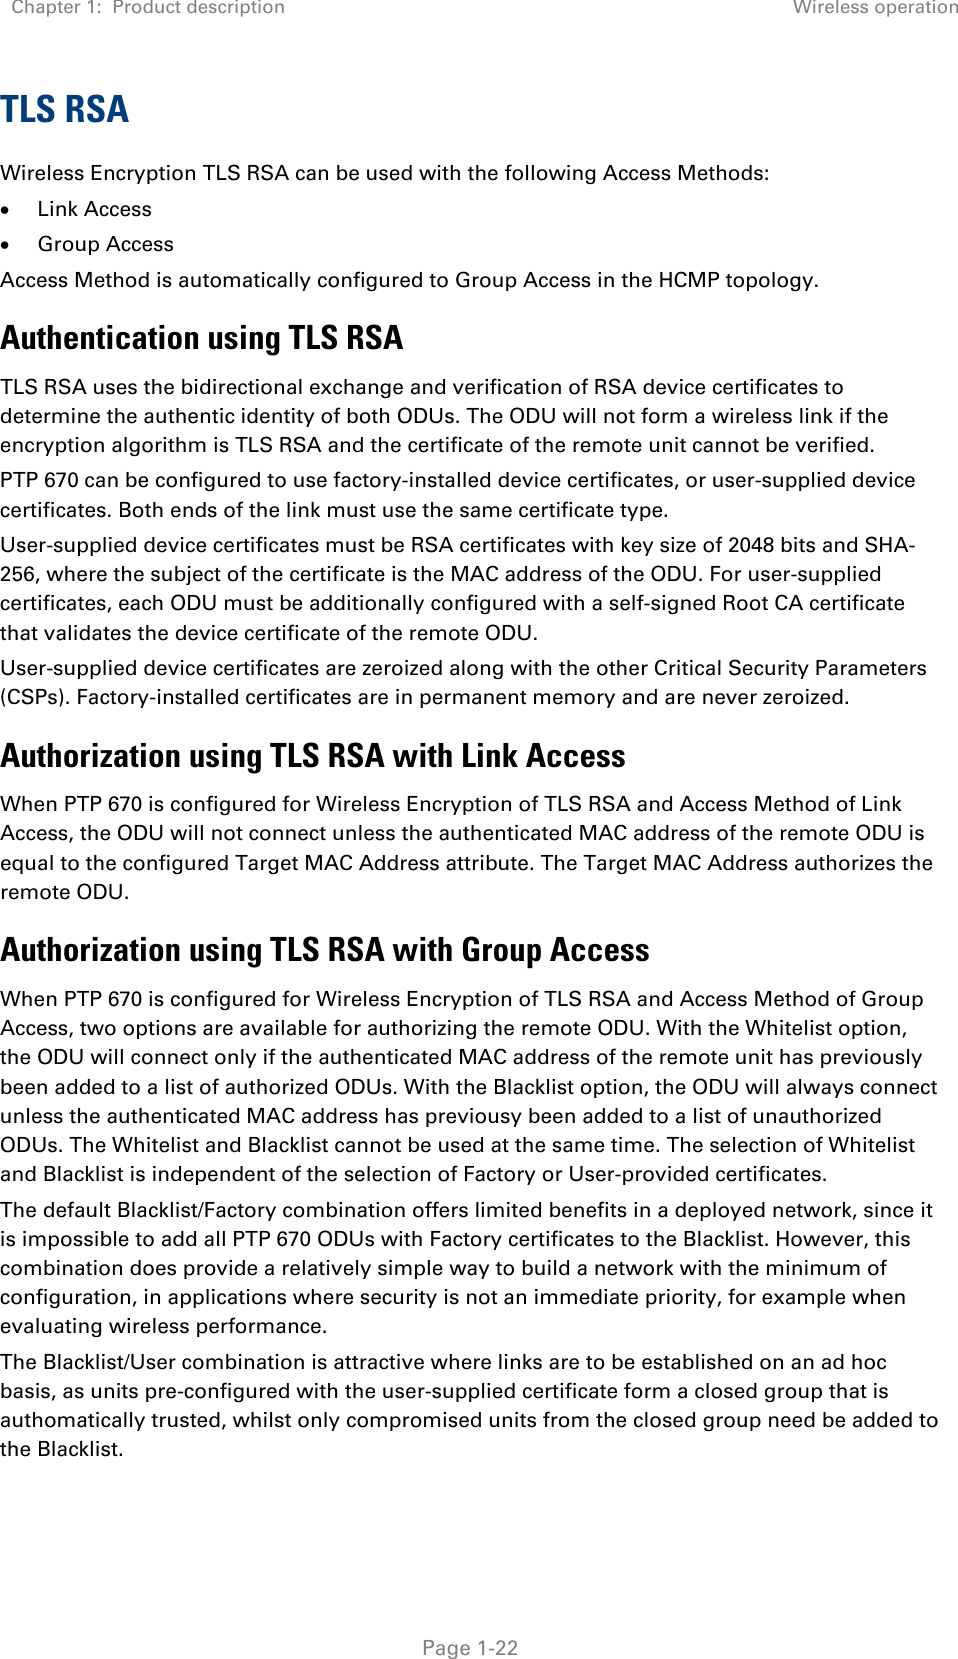 Chapter 1:  Product description Wireless operation   Page 1-22 TLS RSA Wireless Encryption TLS RSA can be used with the following Access Methods: • Link Access • Group Access Access Method is automatically configured to Group Access in the HCMP topology. Authentication using TLS RSA TLS RSA uses the bidirectional exchange and verification of RSA device certificates to determine the authentic identity of both ODUs. The ODU will not form a wireless link if the encryption algorithm is TLS RSA and the certificate of the remote unit cannot be verified. PTP 670 can be configured to use factory-installed device certificates, or user-supplied device certificates. Both ends of the link must use the same certificate type. User-supplied device certificates must be RSA certificates with key size of 2048 bits and SHA-256, where the subject of the certificate is the MAC address of the ODU. For user-supplied certificates, each ODU must be additionally configured with a self-signed Root CA certificate that validates the device certificate of the remote ODU. User-supplied device certificates are zeroized along with the other Critical Security Parameters (CSPs). Factory-installed certificates are in permanent memory and are never zeroized. Authorization using TLS RSA with Link Access When PTP 670 is configured for Wireless Encryption of TLS RSA and Access Method of Link Access, the ODU will not connect unless the authenticated MAC address of the remote ODU is equal to the configured Target MAC Address attribute. The Target MAC Address authorizes the remote ODU. Authorization using TLS RSA with Group Access When PTP 670 is configured for Wireless Encryption of TLS RSA and Access Method of Group Access, two options are available for authorizing the remote ODU. With the Whitelist option, the ODU will connect only if the authenticated MAC address of the remote unit has previously been added to a list of authorized ODUs. With the Blacklist option, the ODU will always connect unless the authenticated MAC address has previousy been added to a list of unauthorized ODUs. The Whitelist and Blacklist cannot be used at the same time. The selection of Whitelist and Blacklist is independent of the selection of Factory or User-provided certificates. The default Blacklist/Factory combination offers limited benefits in a deployed network, since it is impossible to add all PTP 670 ODUs with Factory certificates to the Blacklist. However, this combination does provide a relatively simple way to build a network with the minimum of configuration, in applications where security is not an immediate priority, for example when evaluating wireless performance. The Blacklist/User combination is attractive where links are to be established on an ad hoc basis, as units pre-configured with the user-supplied certificate form a closed group that is authomatically trusted, whilst only compromised units from the closed group need be added to the Blacklist.  